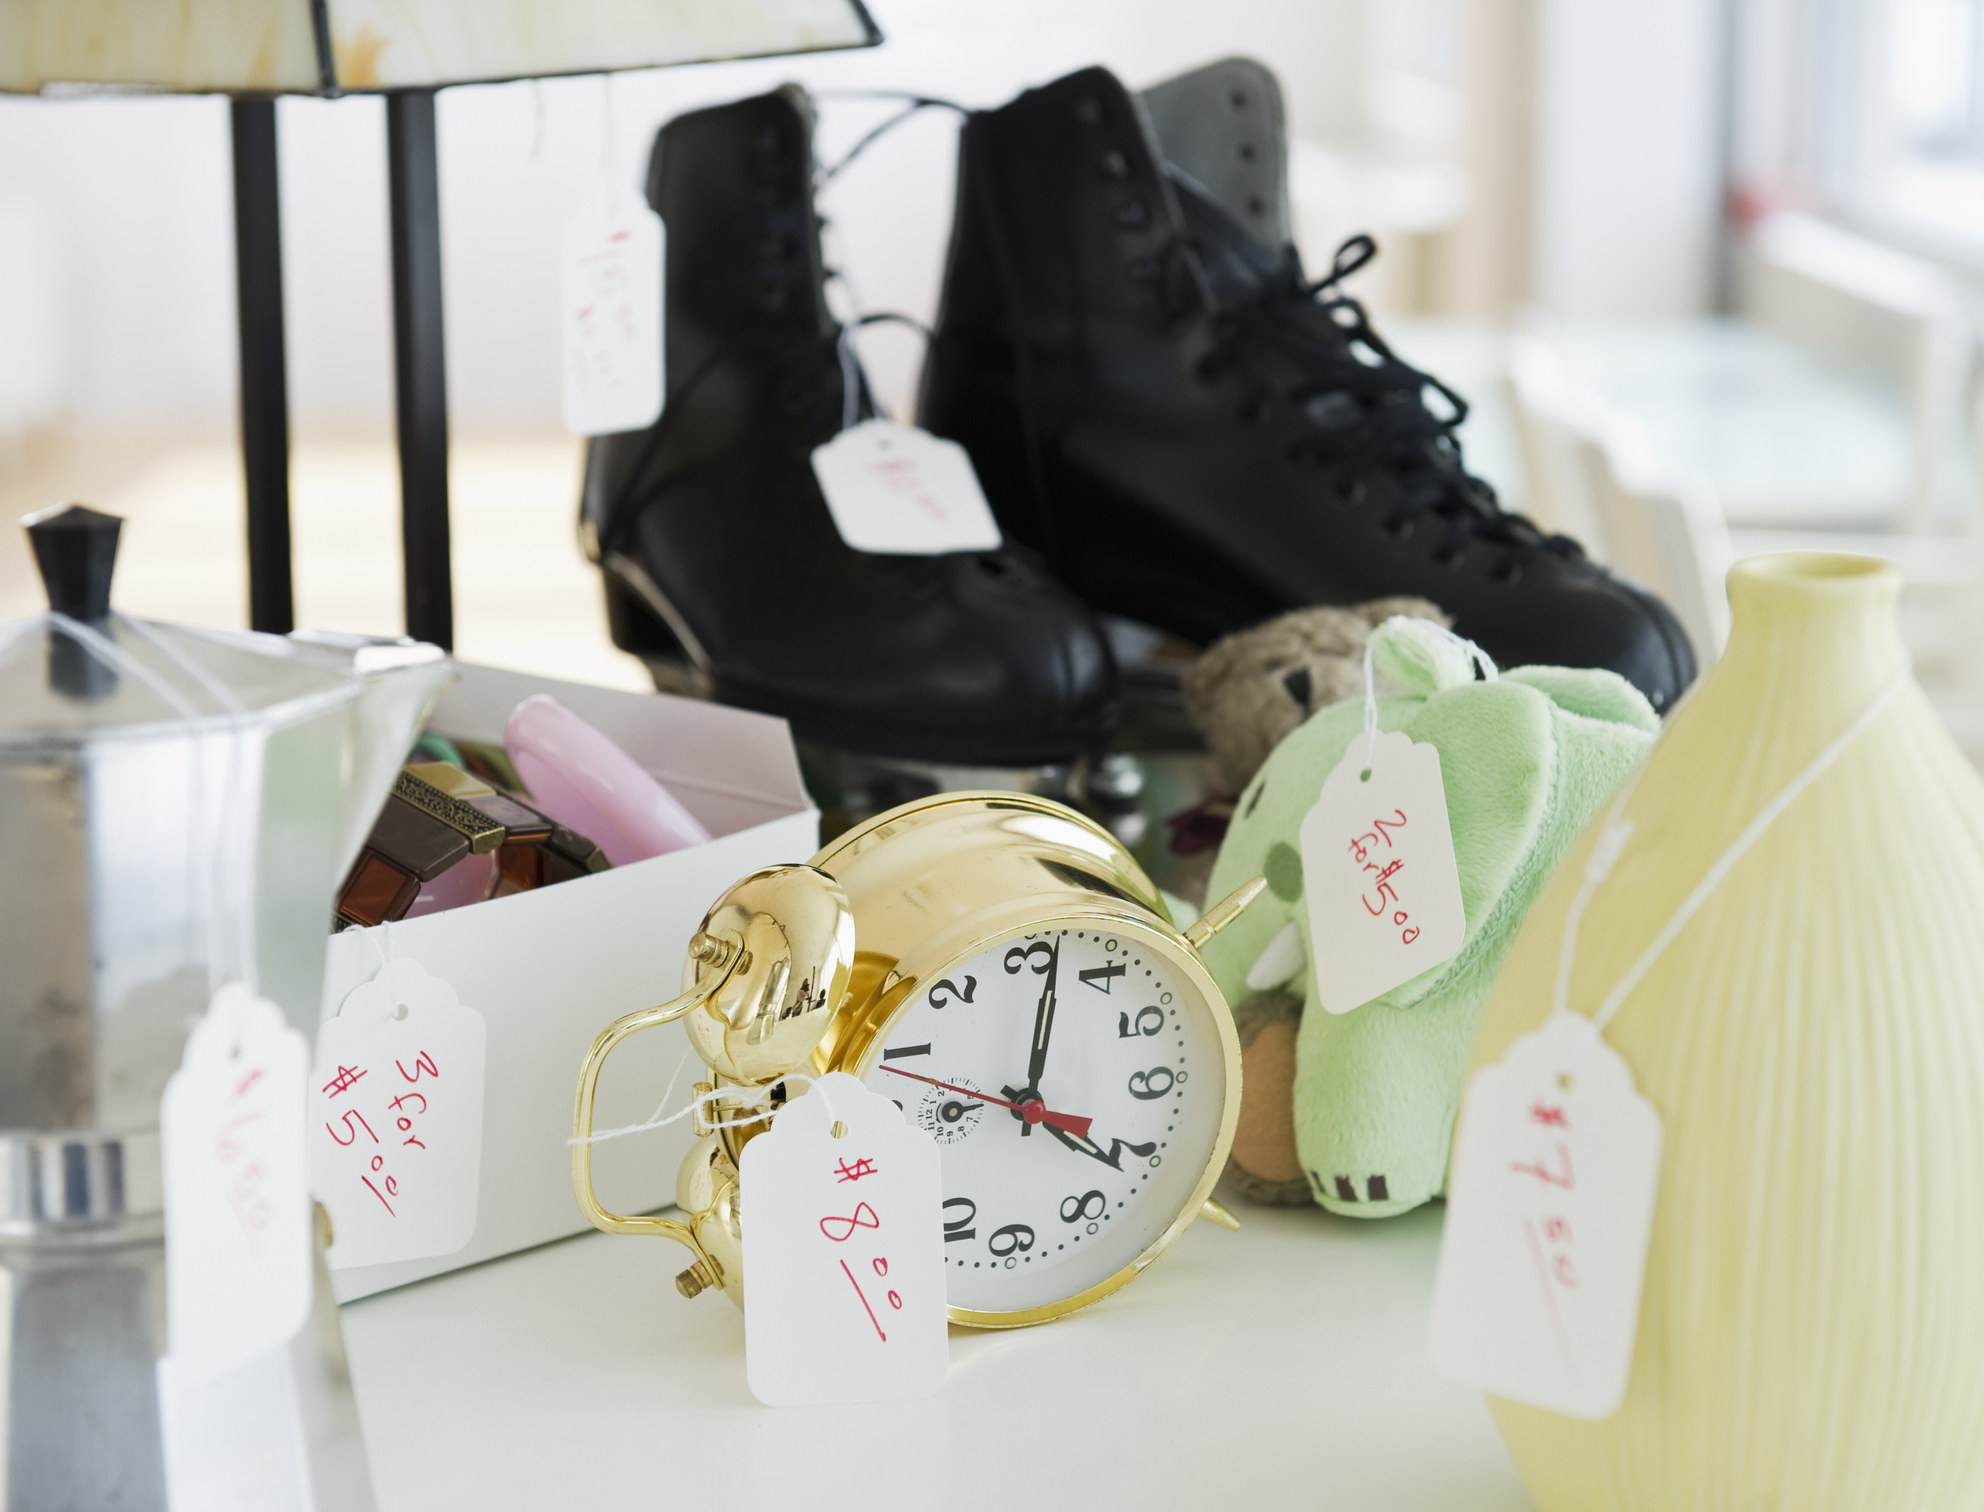 Various objects for sale, like a clock, vase, and shoes